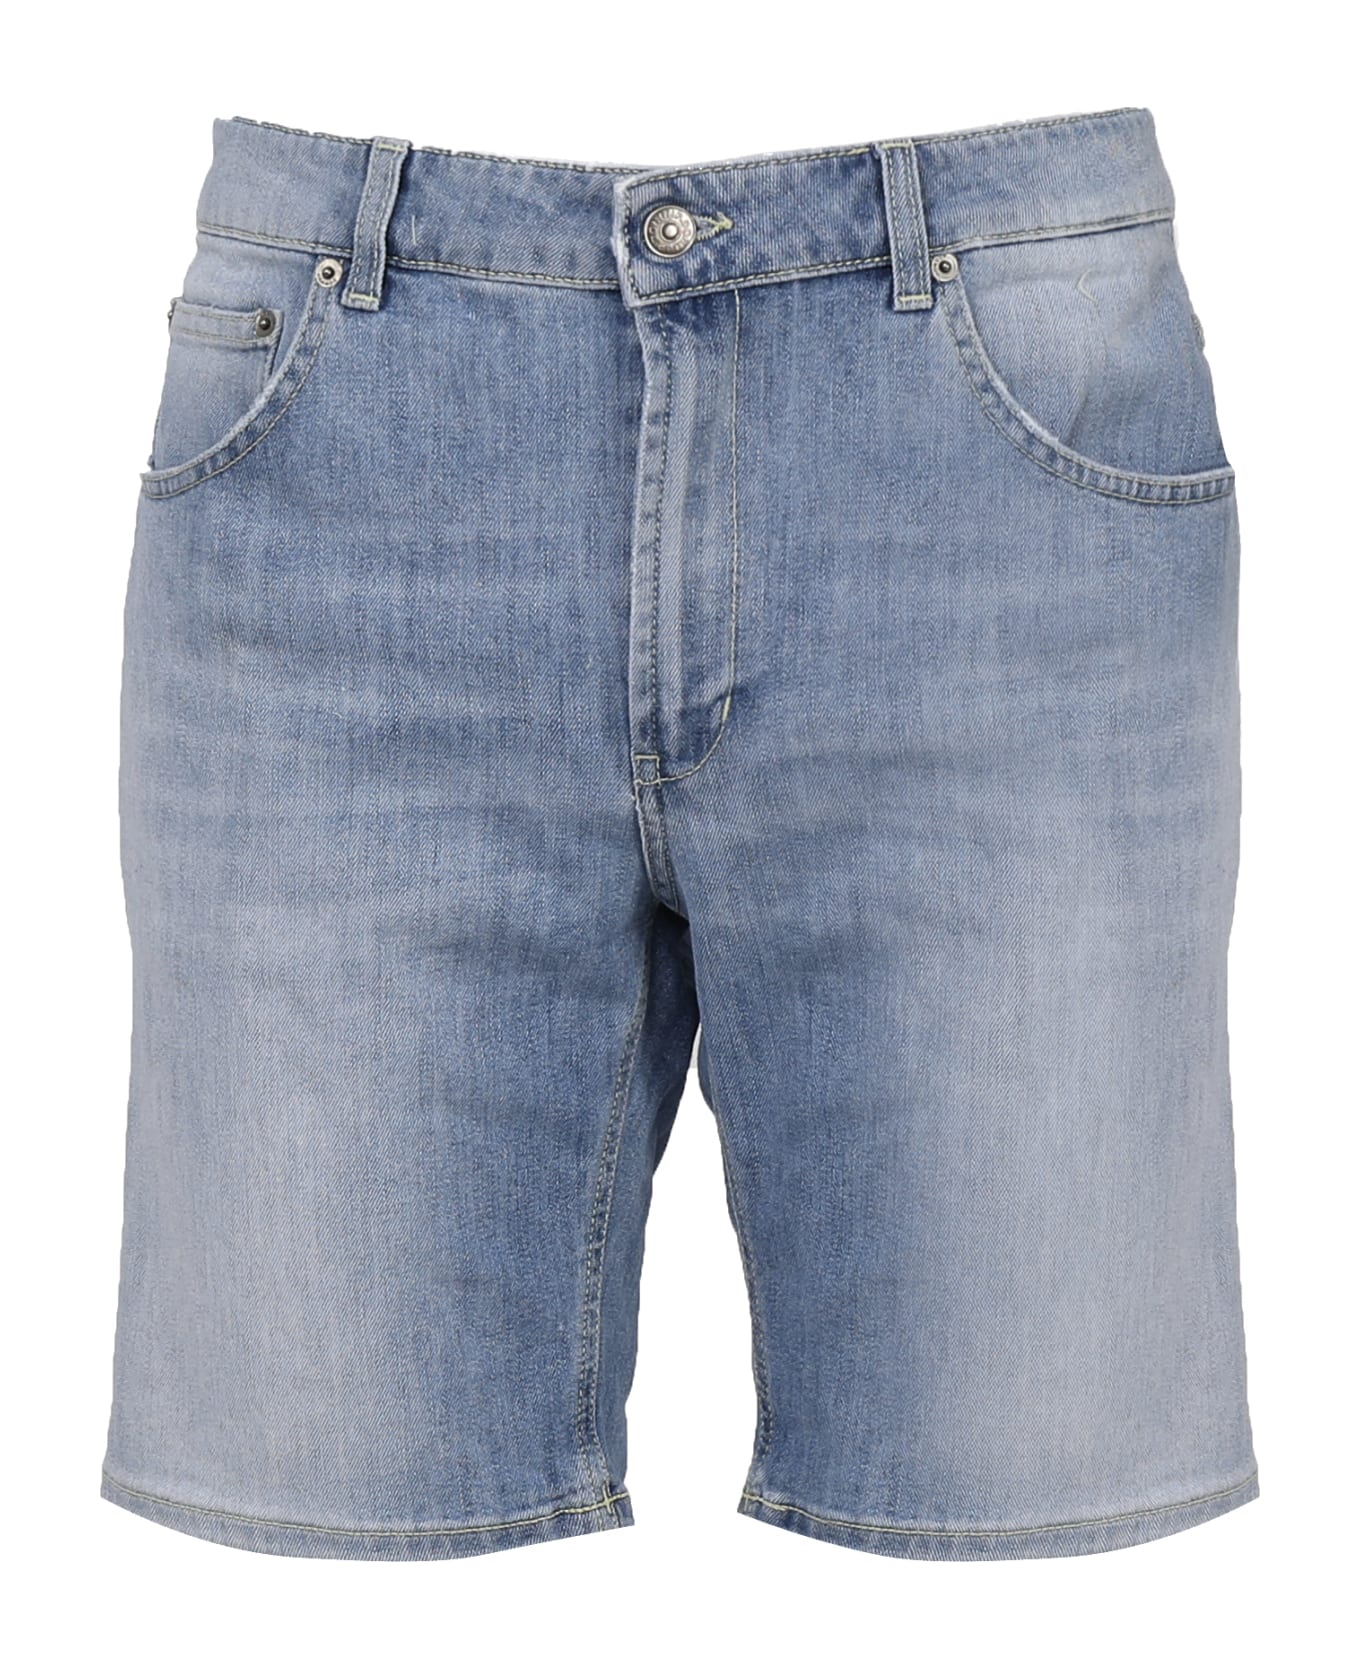 Dondup Shorts In Cotton - Light blue